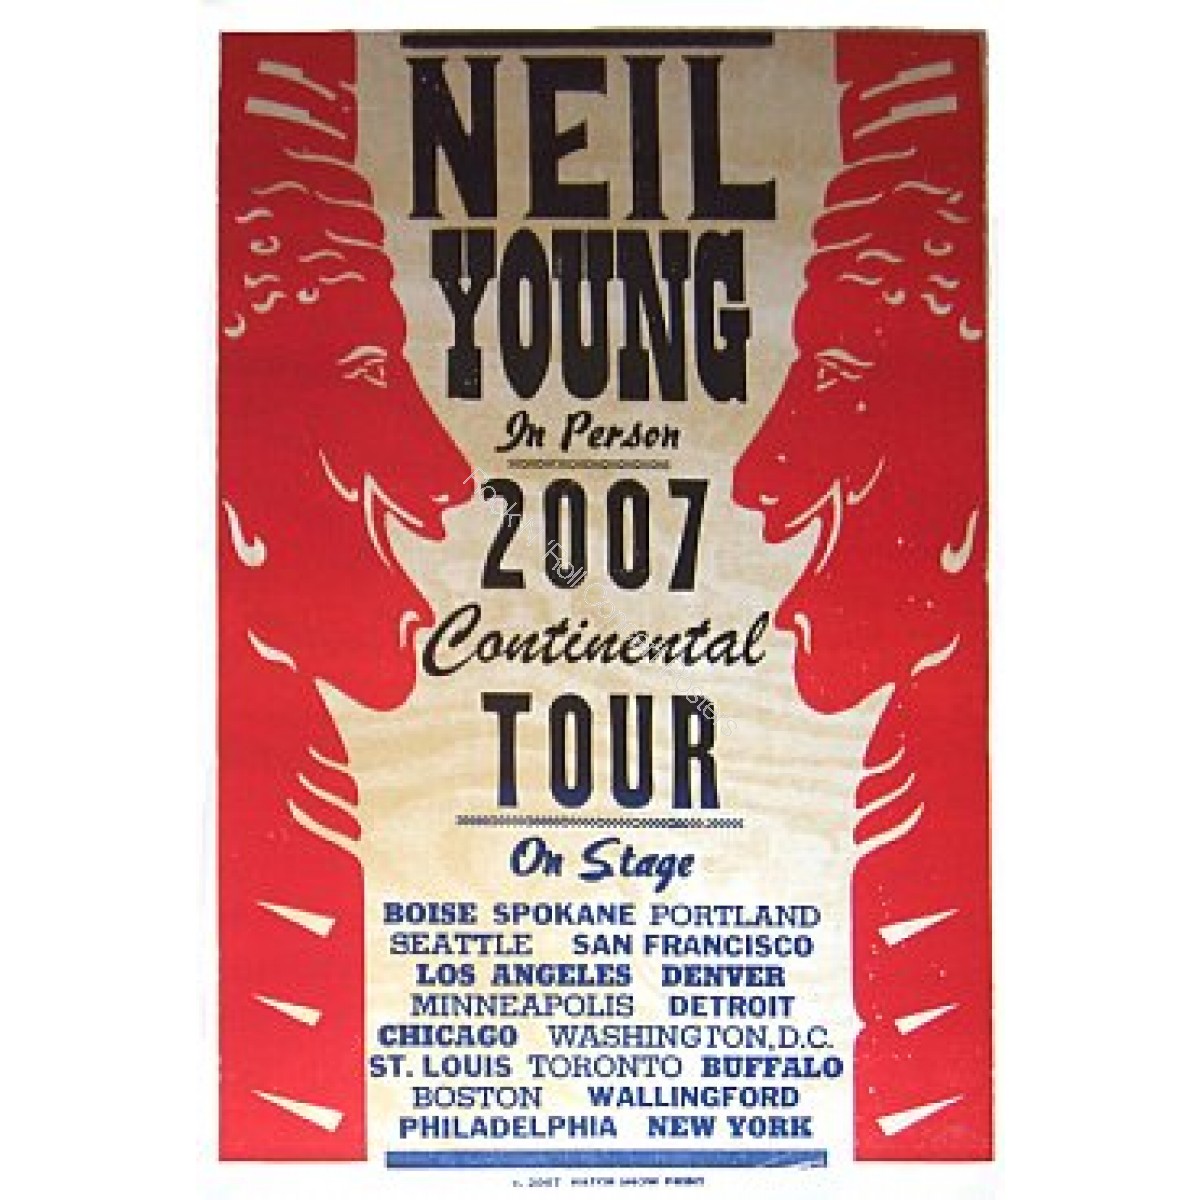 Neil Young North American Tour Poster 2007 By Hatch Show Print #B